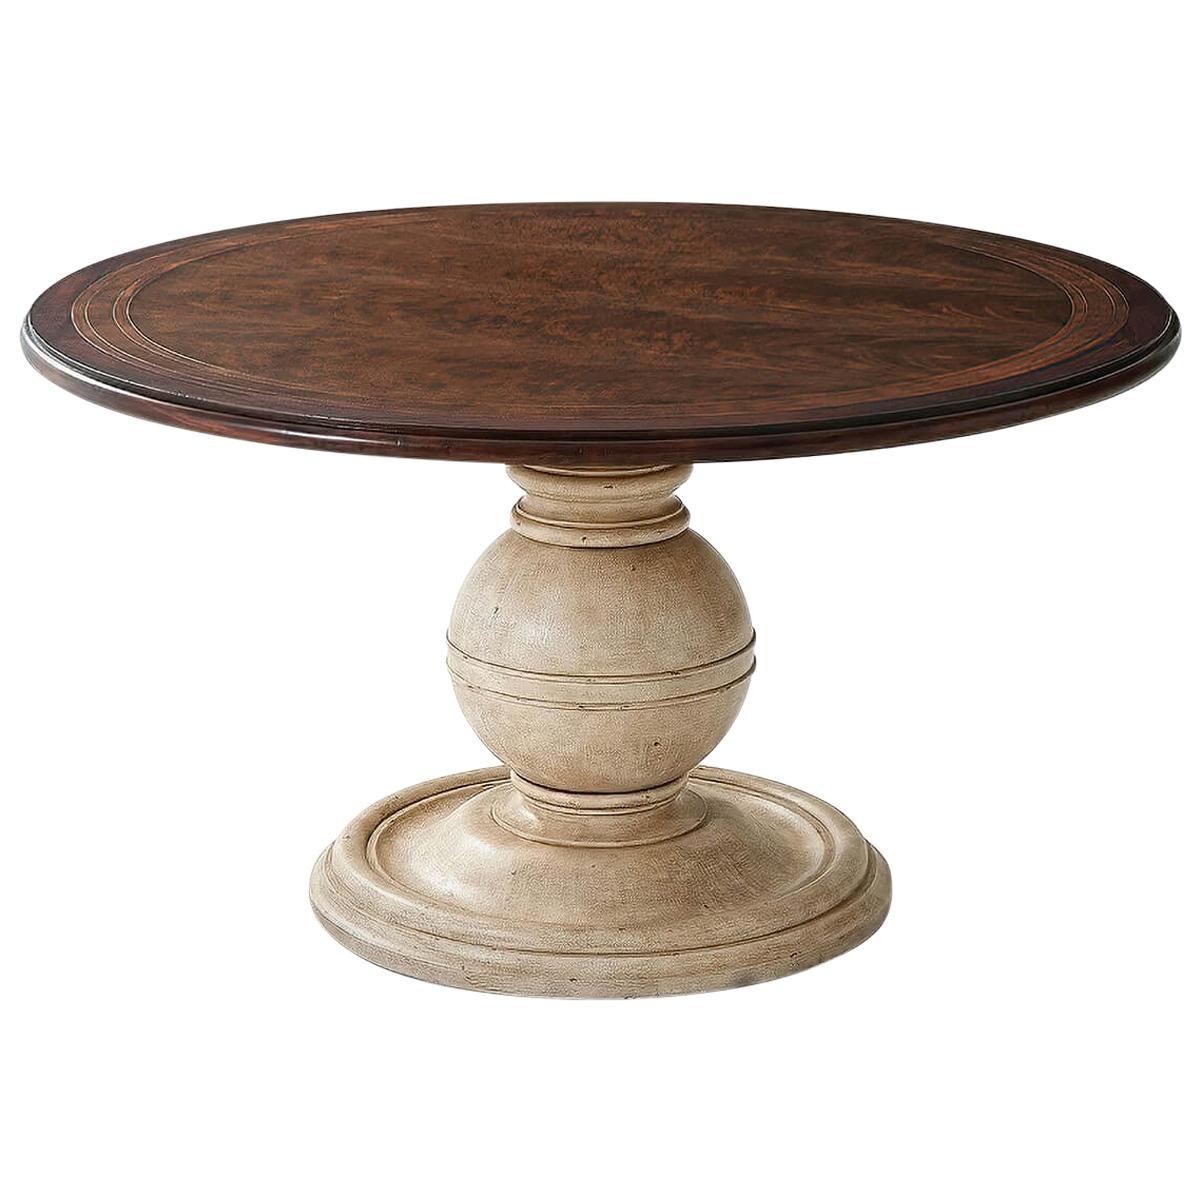 French Art Deco Round Pedestal Dining Table For Sale